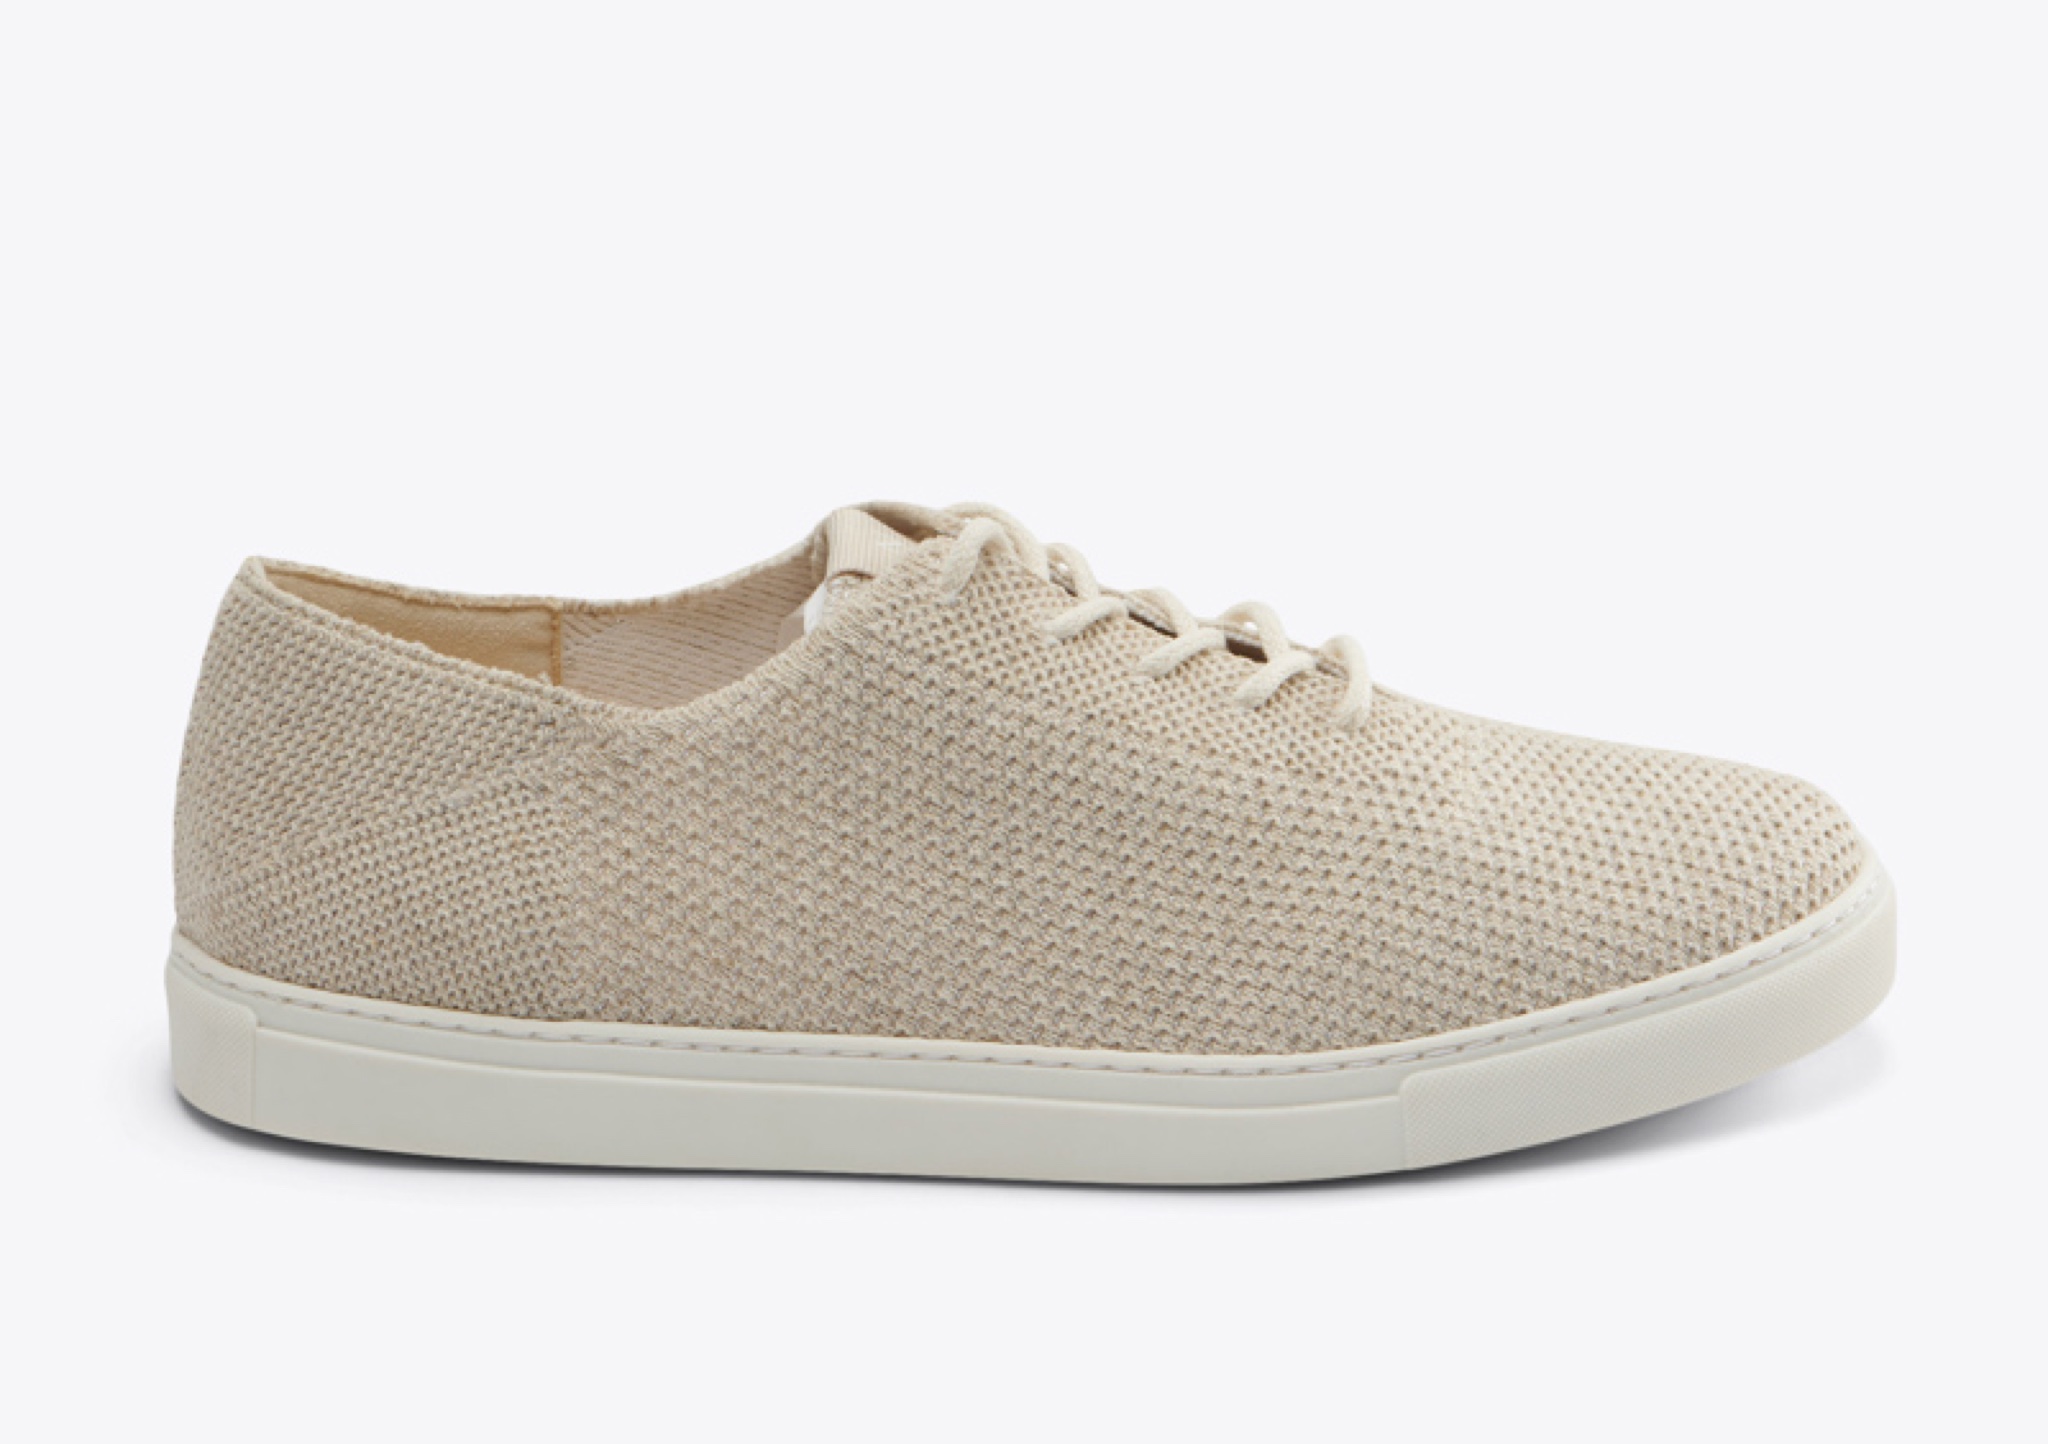 Nisolo Men's 365 Eco-Knit Sneaker Linen - Every Nisolo product is built on the foundation of comfort, function, and design. 